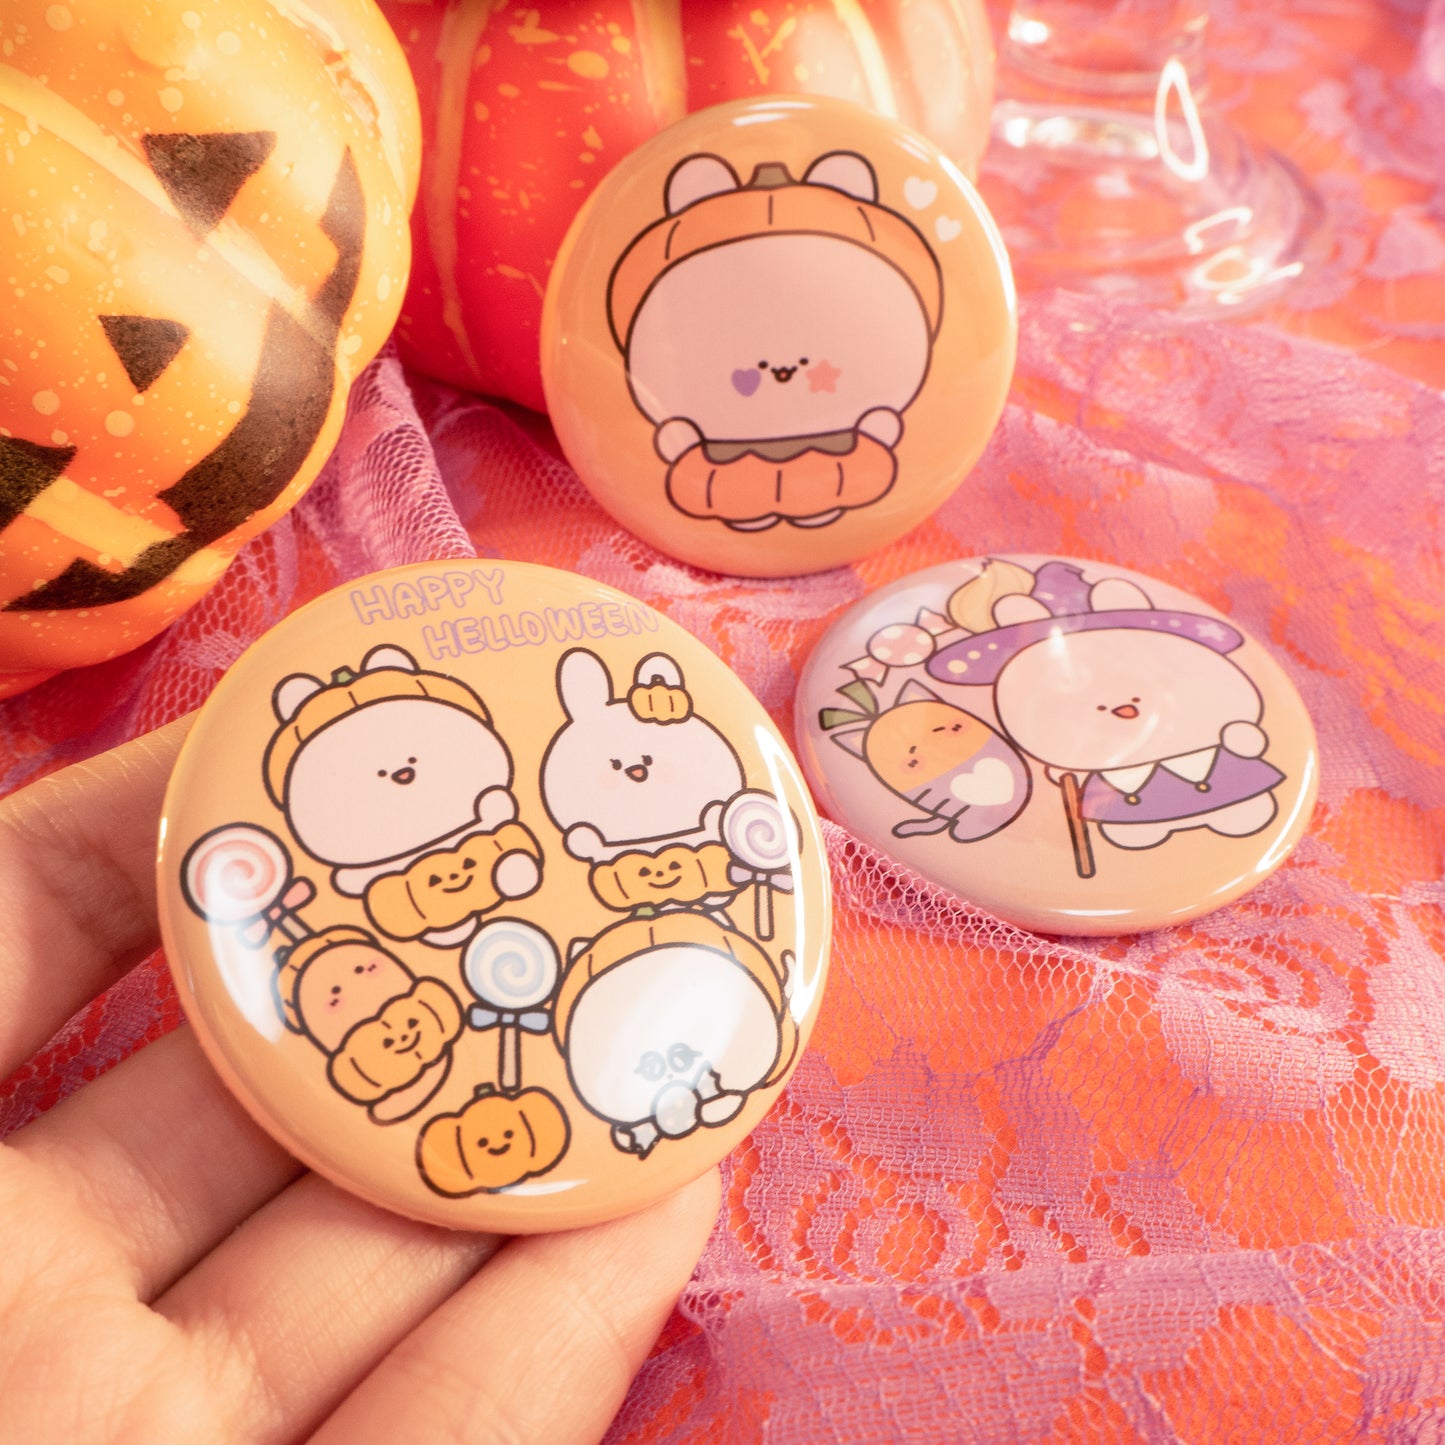 [Asamimi-chan] Halloween random can badge complete set (6 pieces) [shipped in late October]